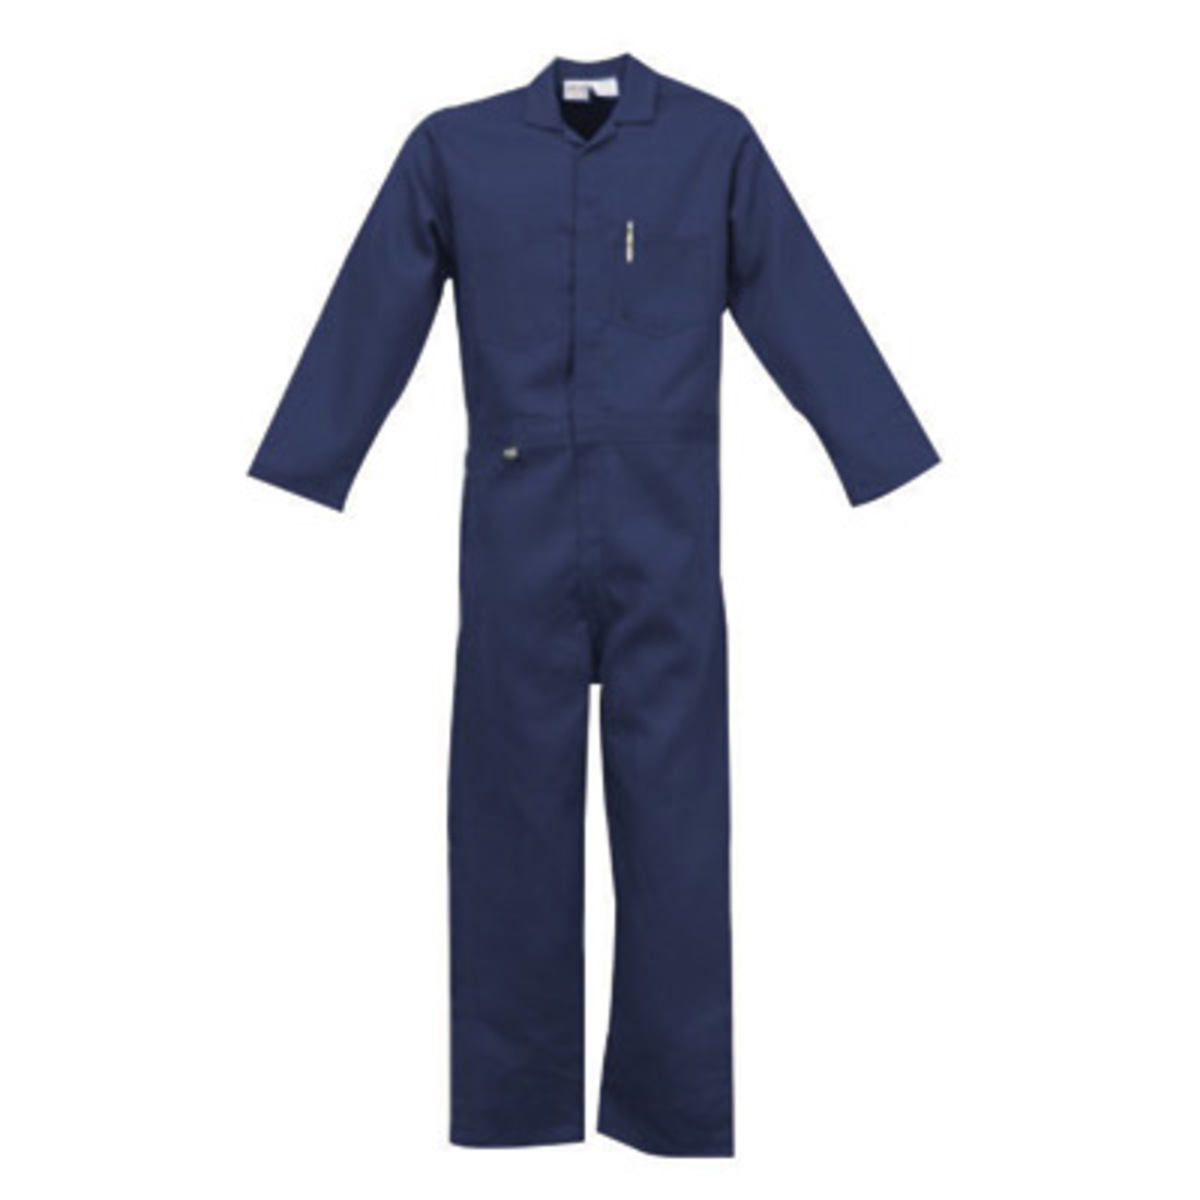 Stanco Safety Products™ X-Large Navy Blue Indura® UltraSoft® Arc Rated Flame Resistant Coveralls With Front Zipper Closure